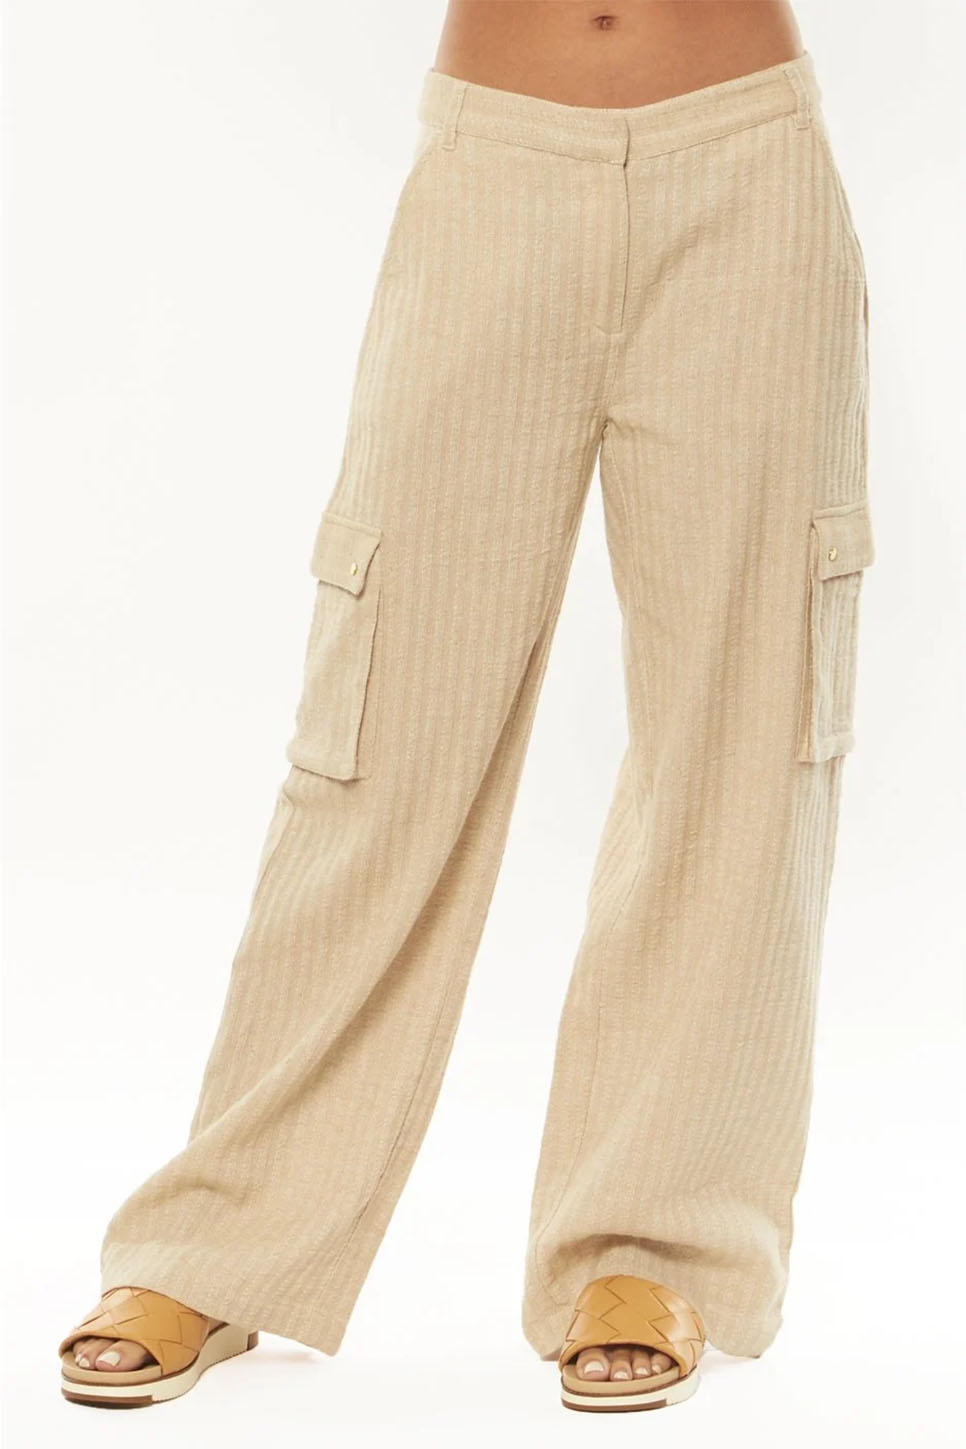 Amuse Society - In Harmony Woven Pant - Linen - Front